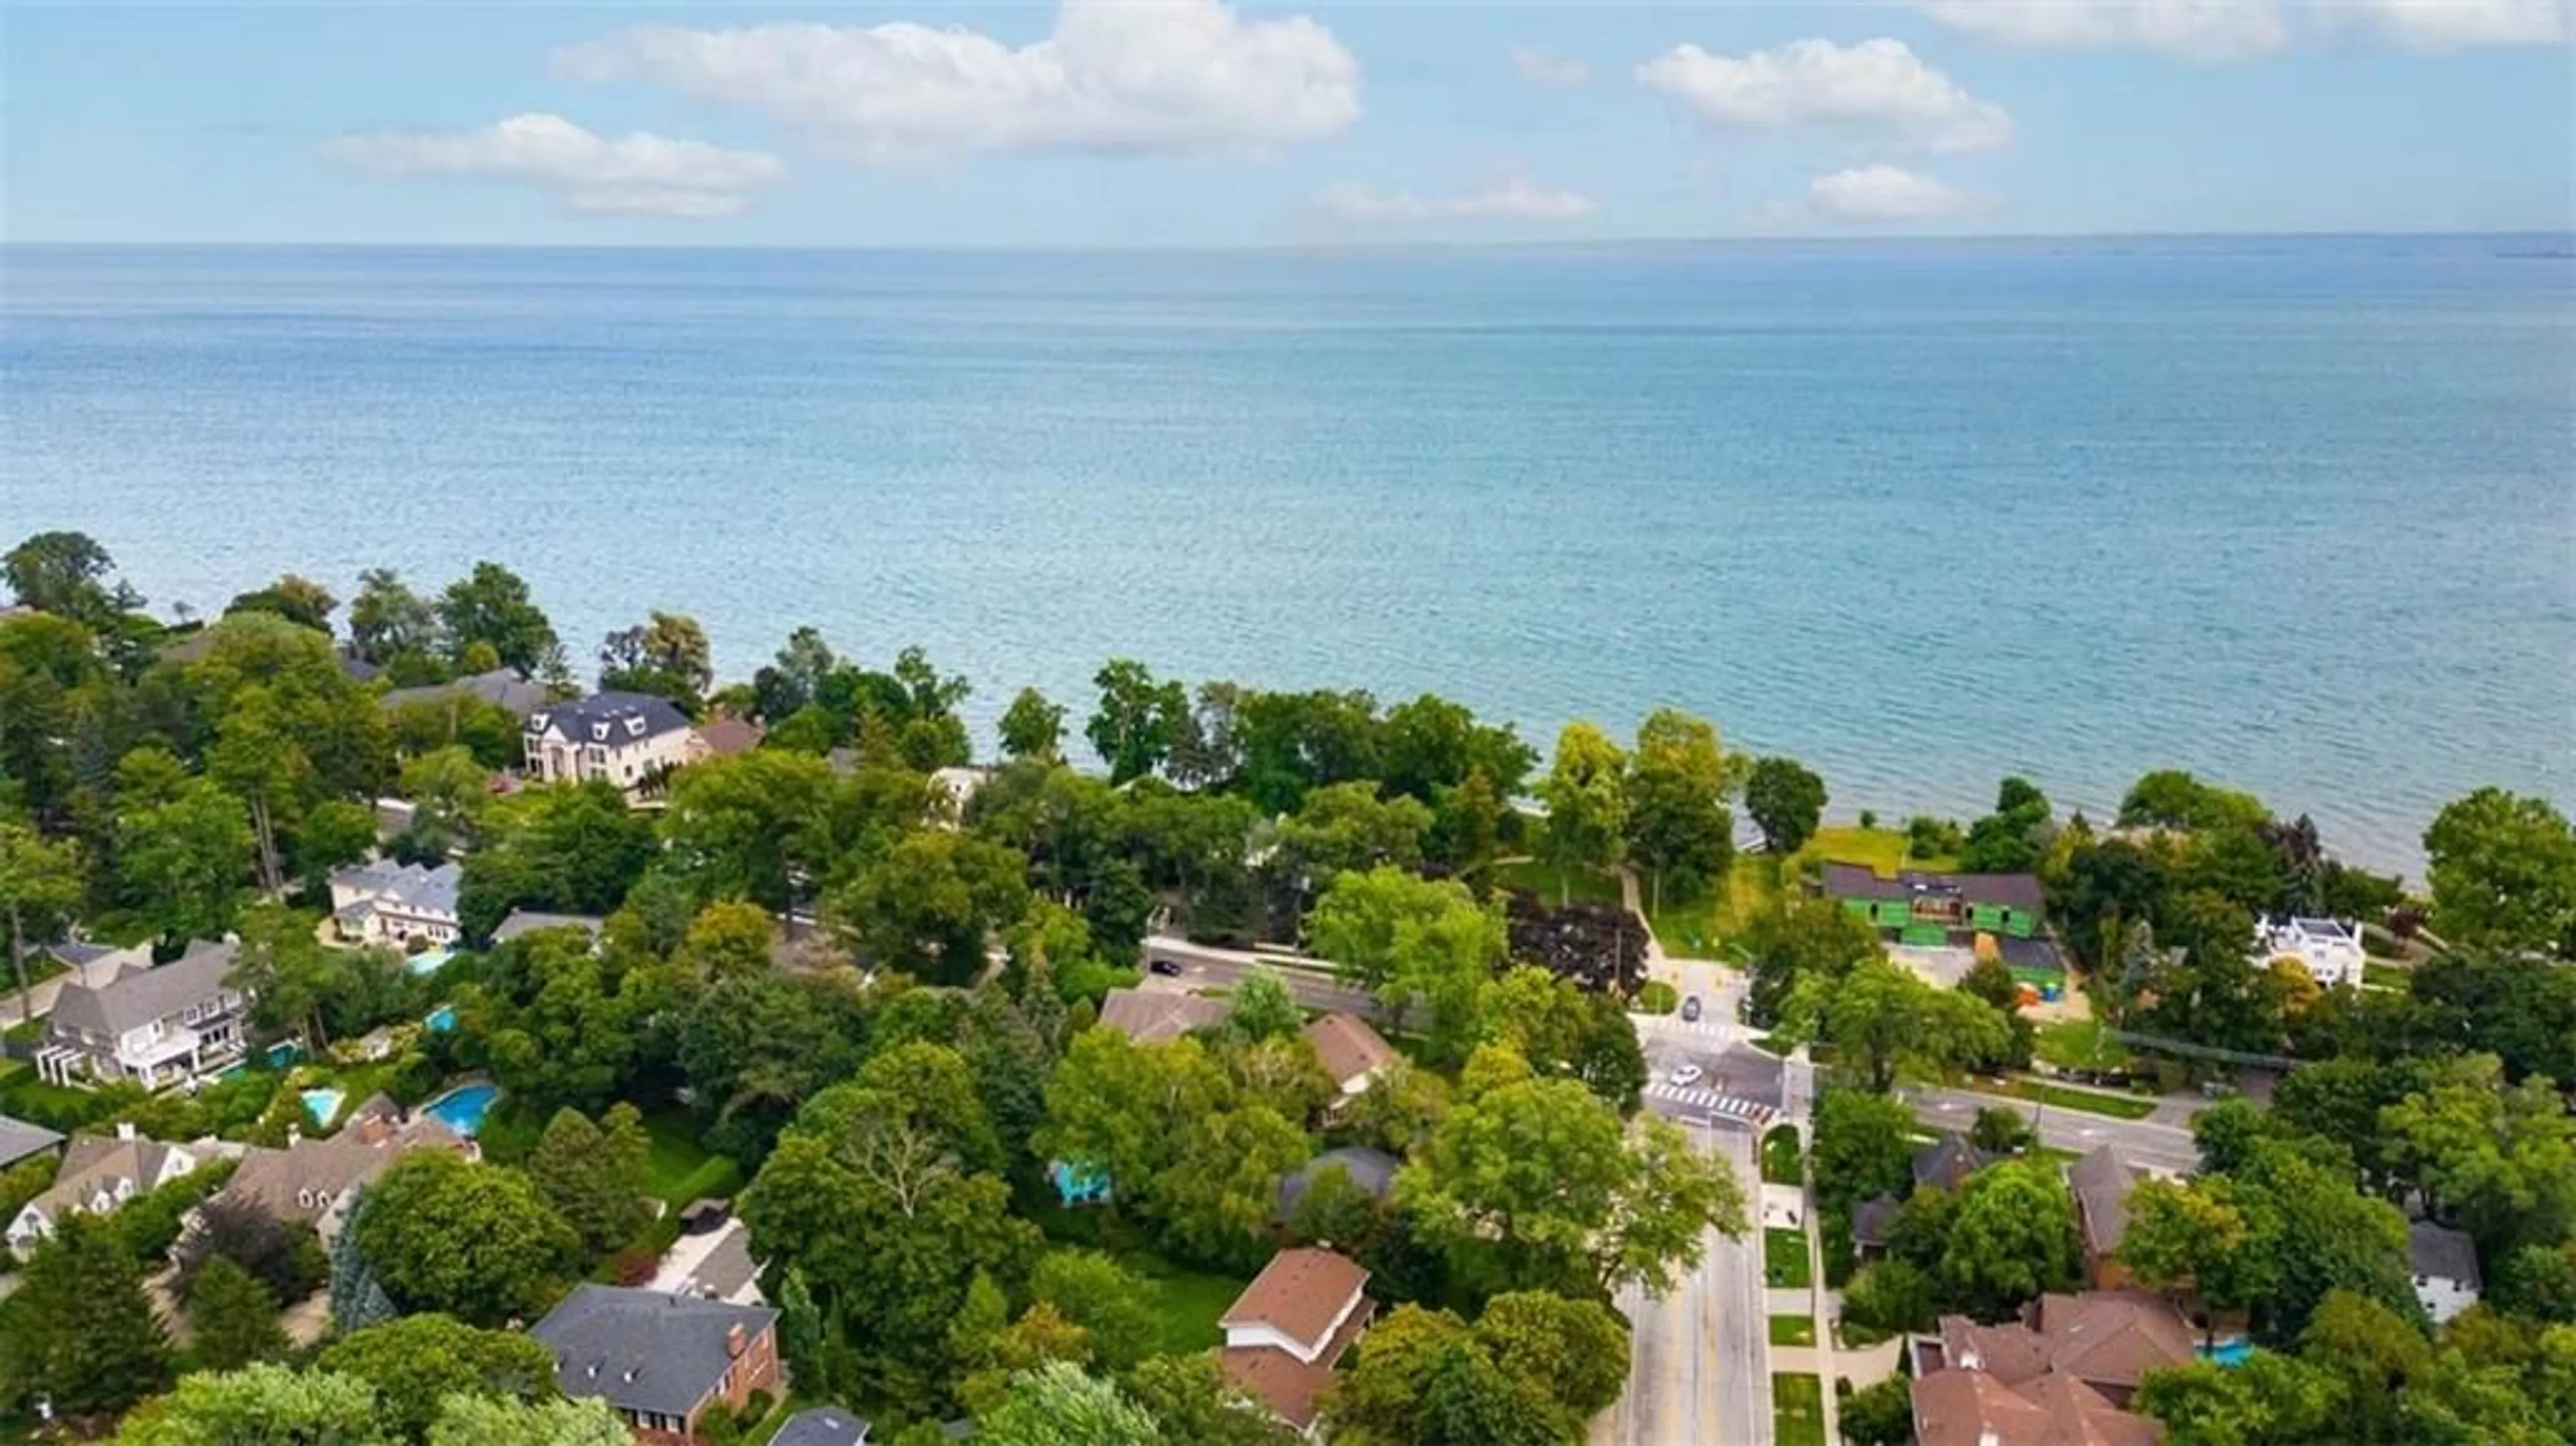 Lakeview for 3011 Lakeshore Rd, Burlington Ontario L7N 1A2